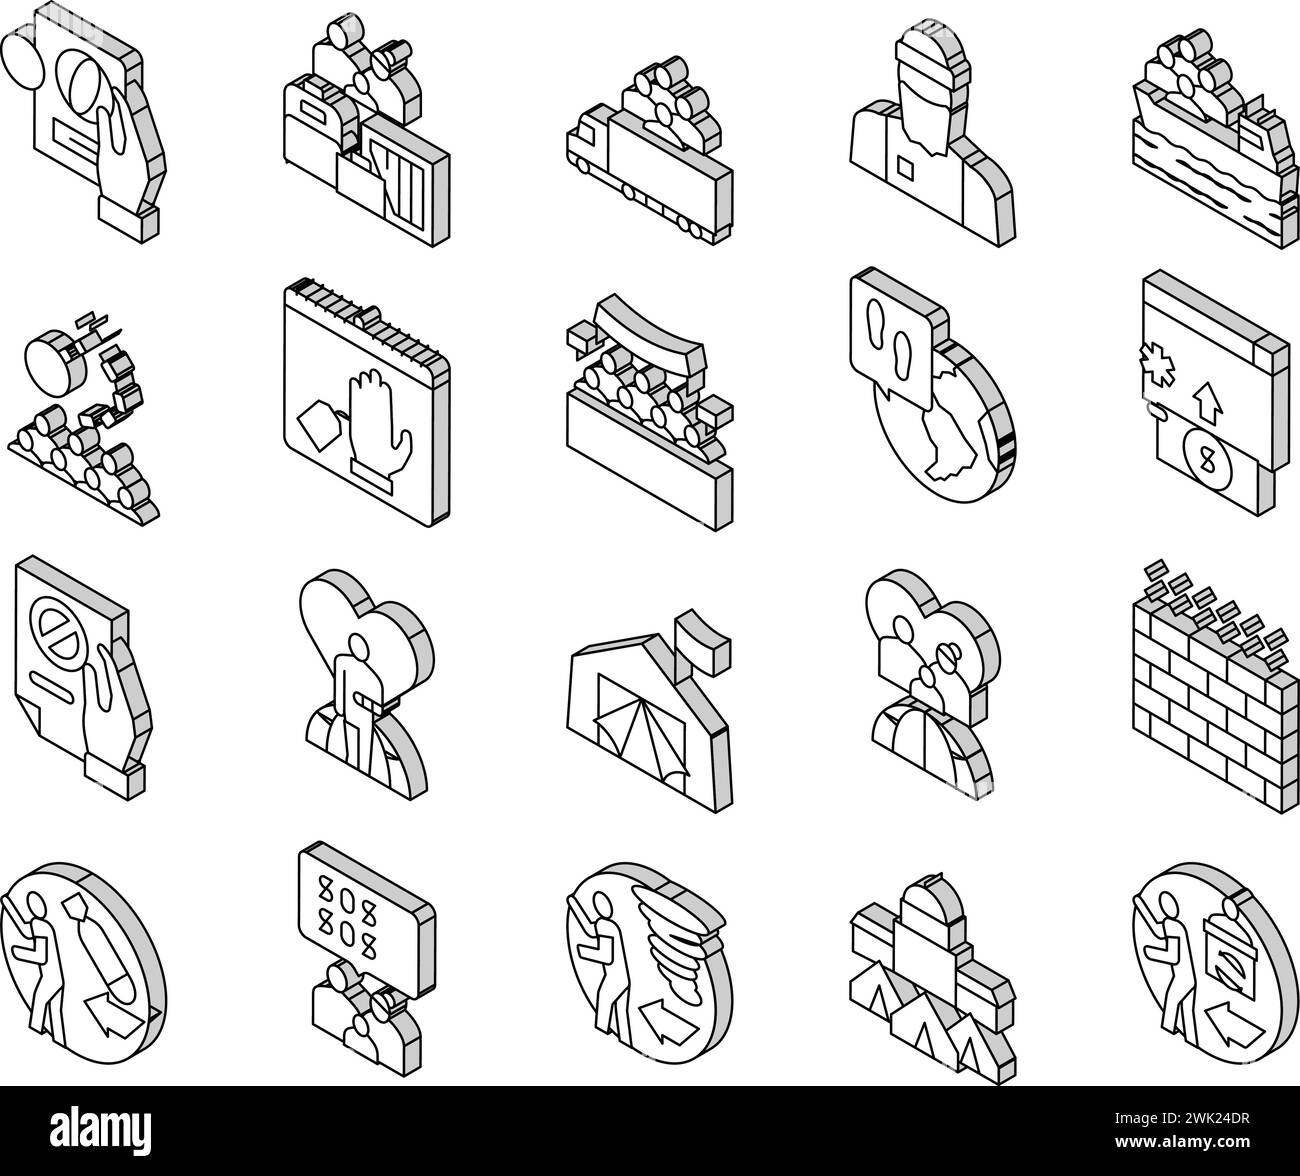 Refugee From Problem Collection isometric icons set vector Stock Vector